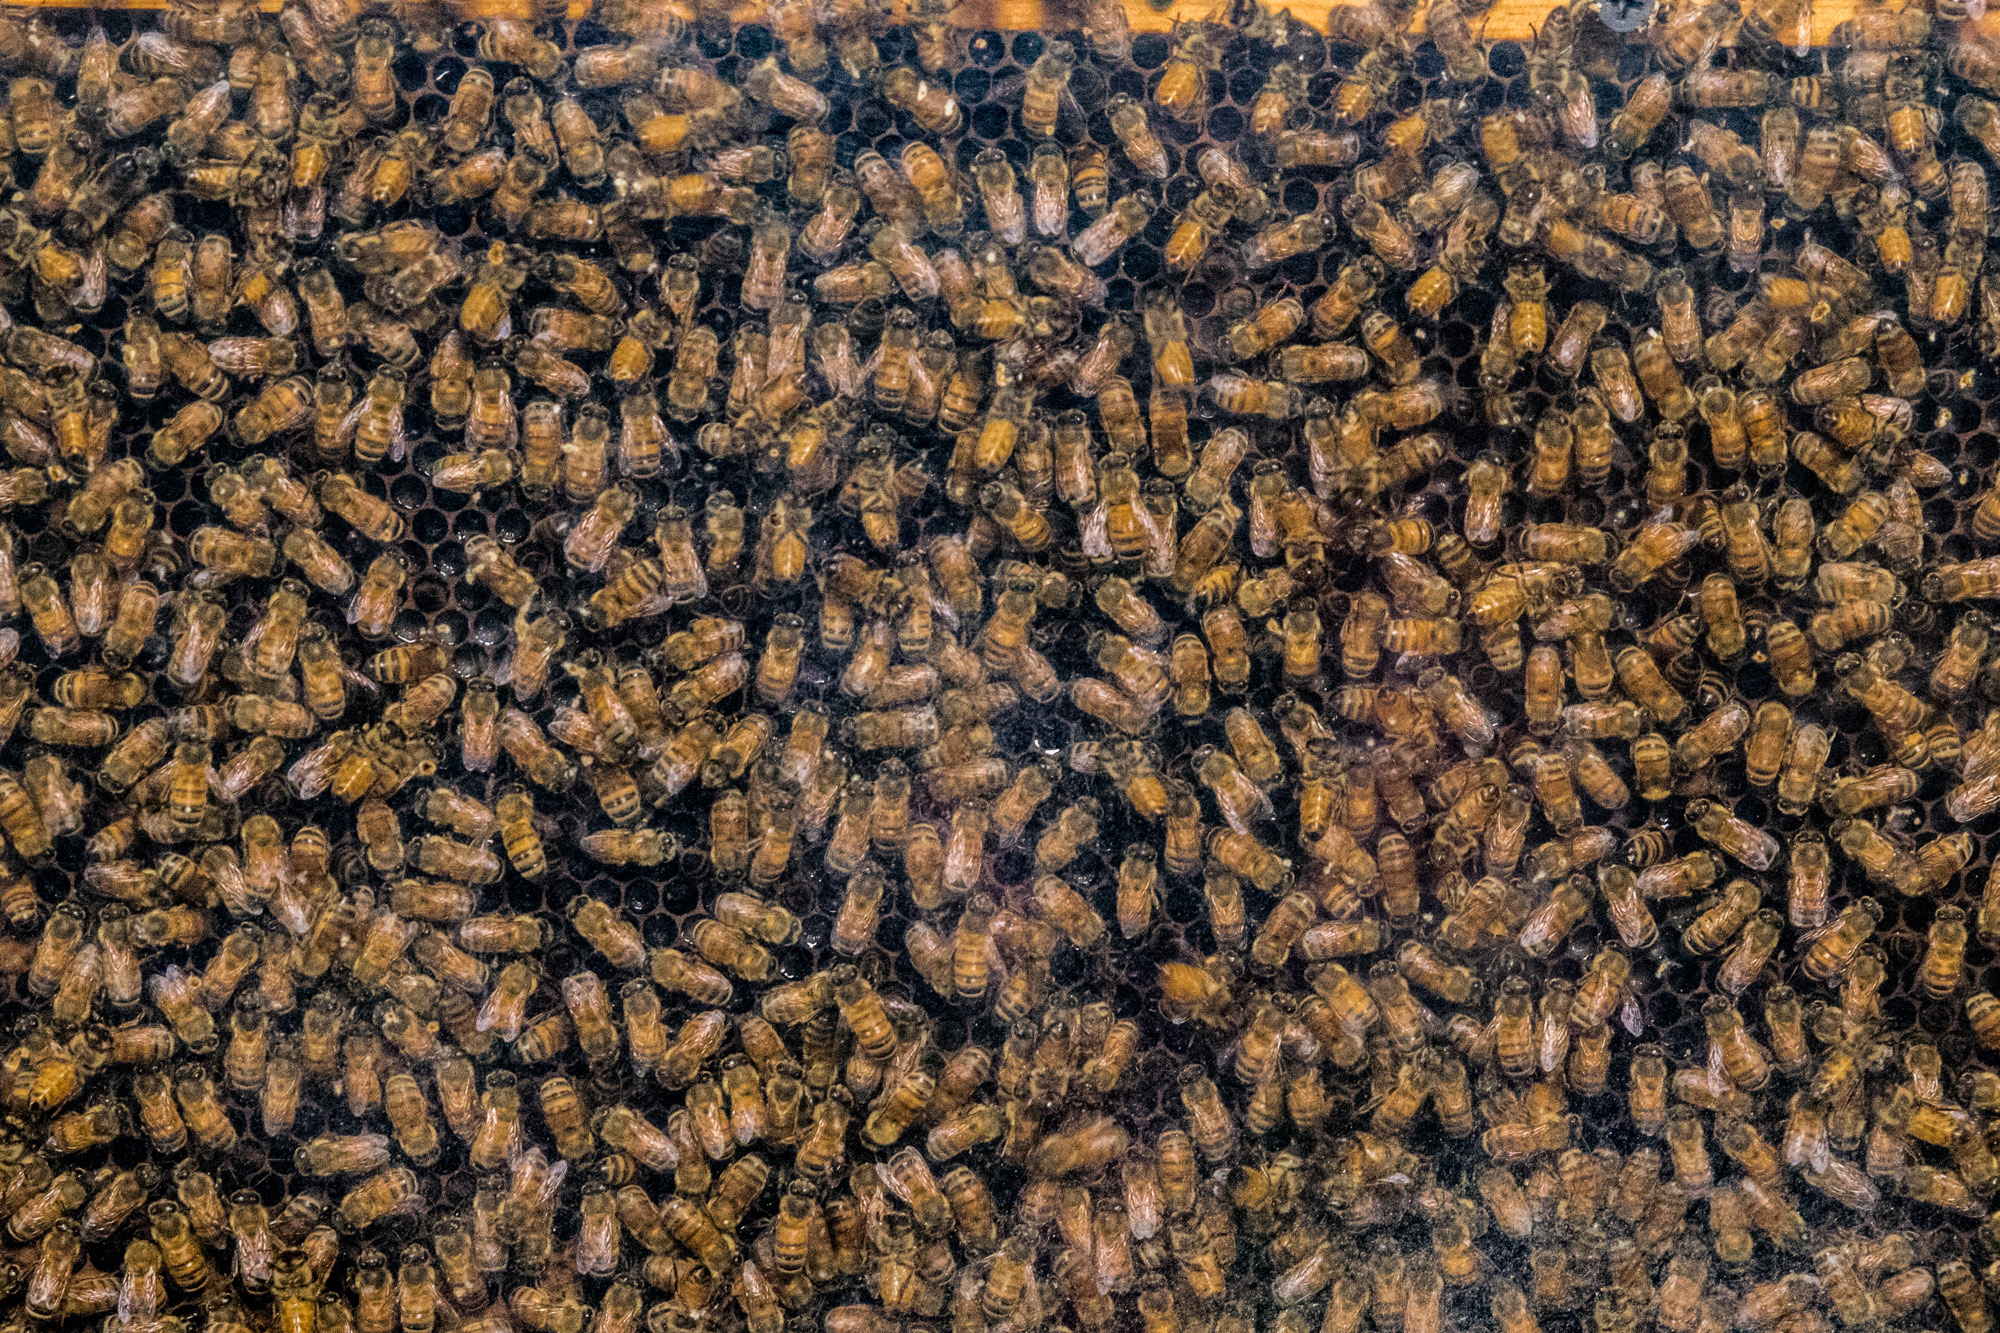  A colony of bees on display at the Los Angeles Natural History Museums 32nd annual Bug Fair on May 19, 2018. (Zane Meyer-Thornton/Corsair Photo) 